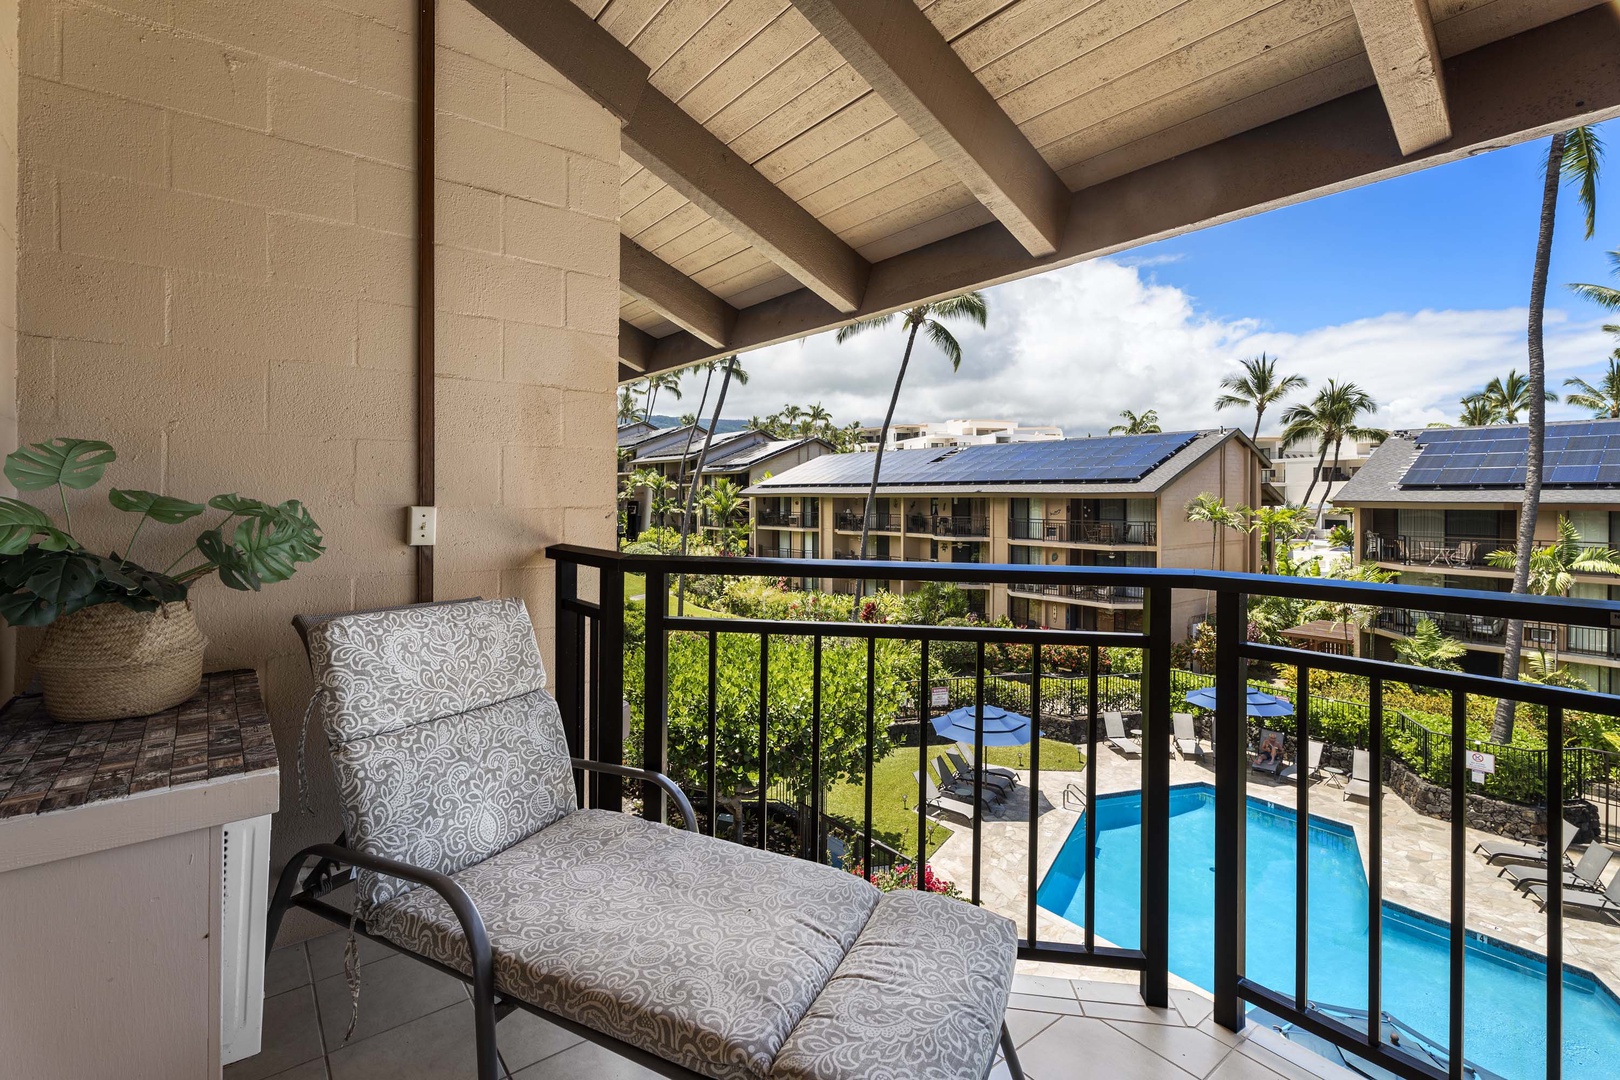 Kailua Kona Vacation Rentals, Kona Makai 6303 - Unwind on our lanai, a peaceful retreat offering sweeping views of the shimmering pool.